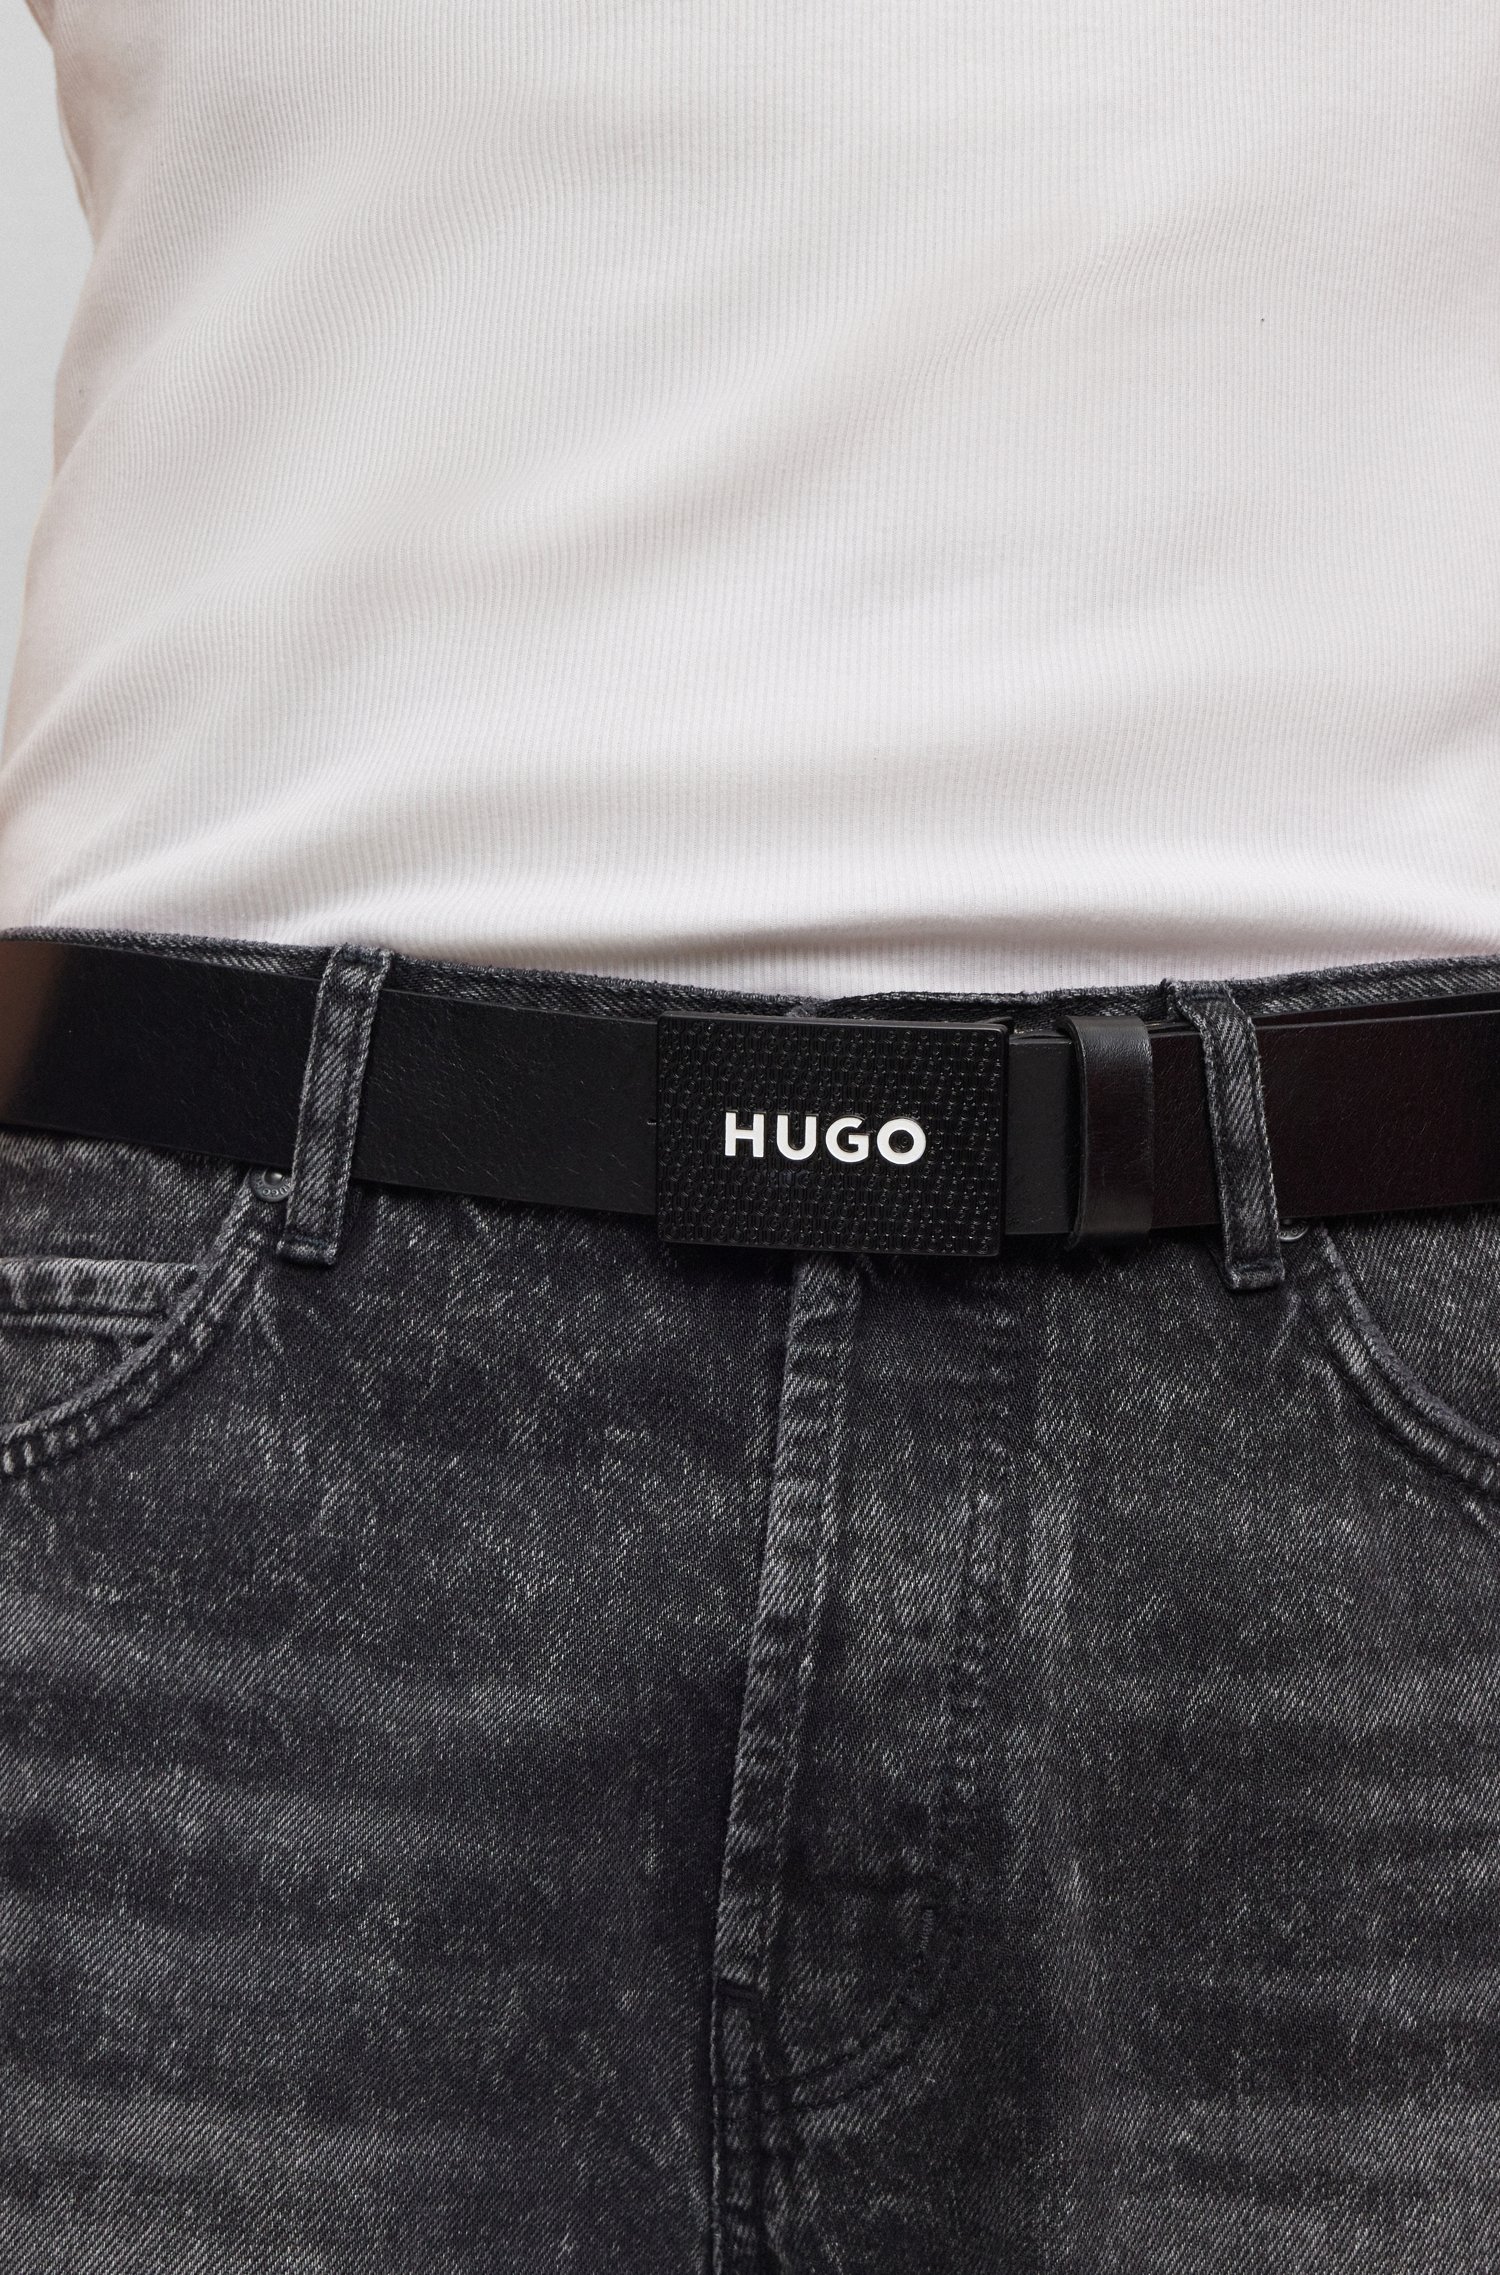 Italian-leather belt with branded plaque buckle